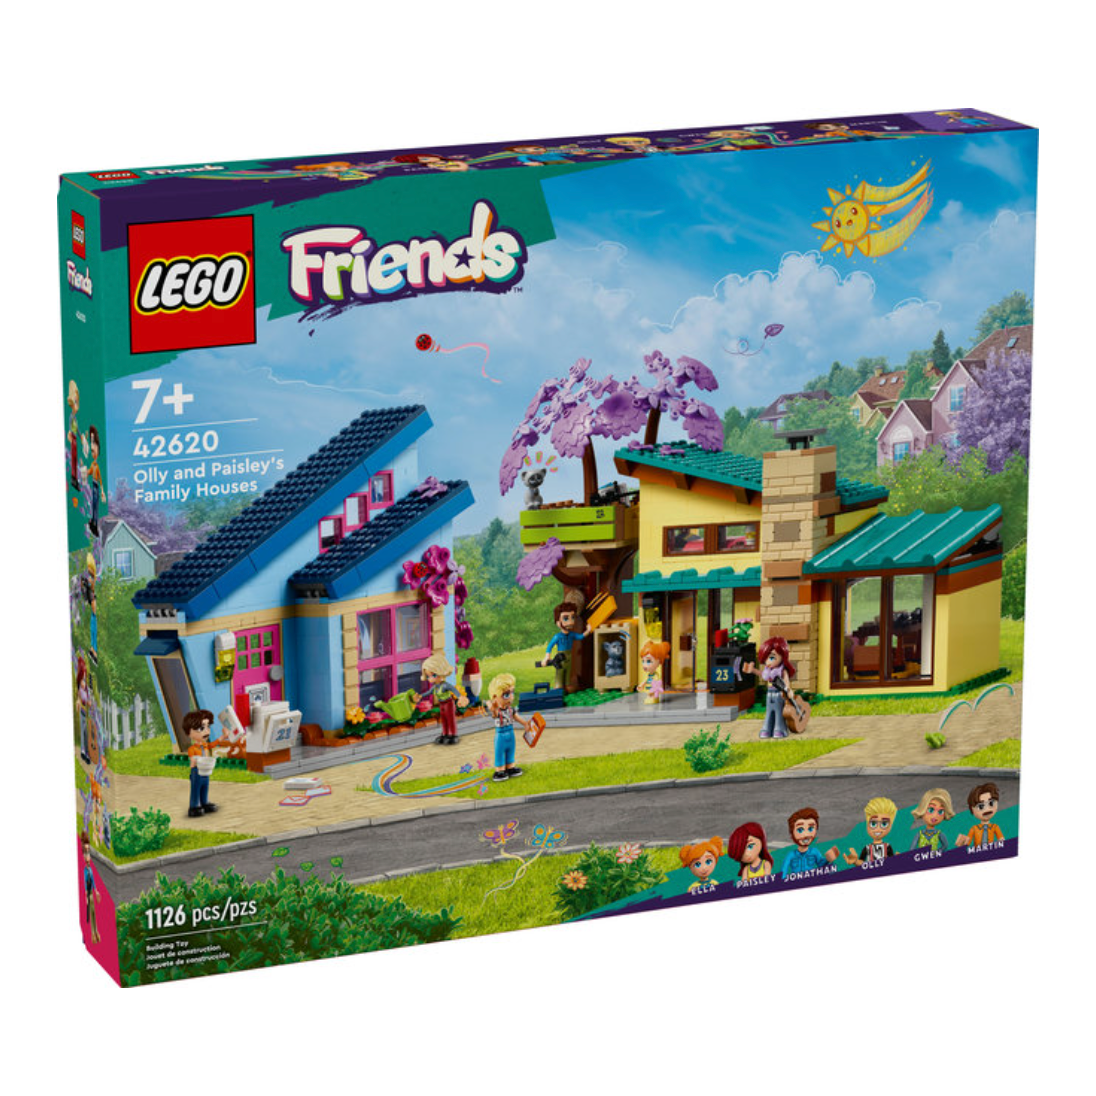 Lego Friends Olly and Paisley's Family Houses